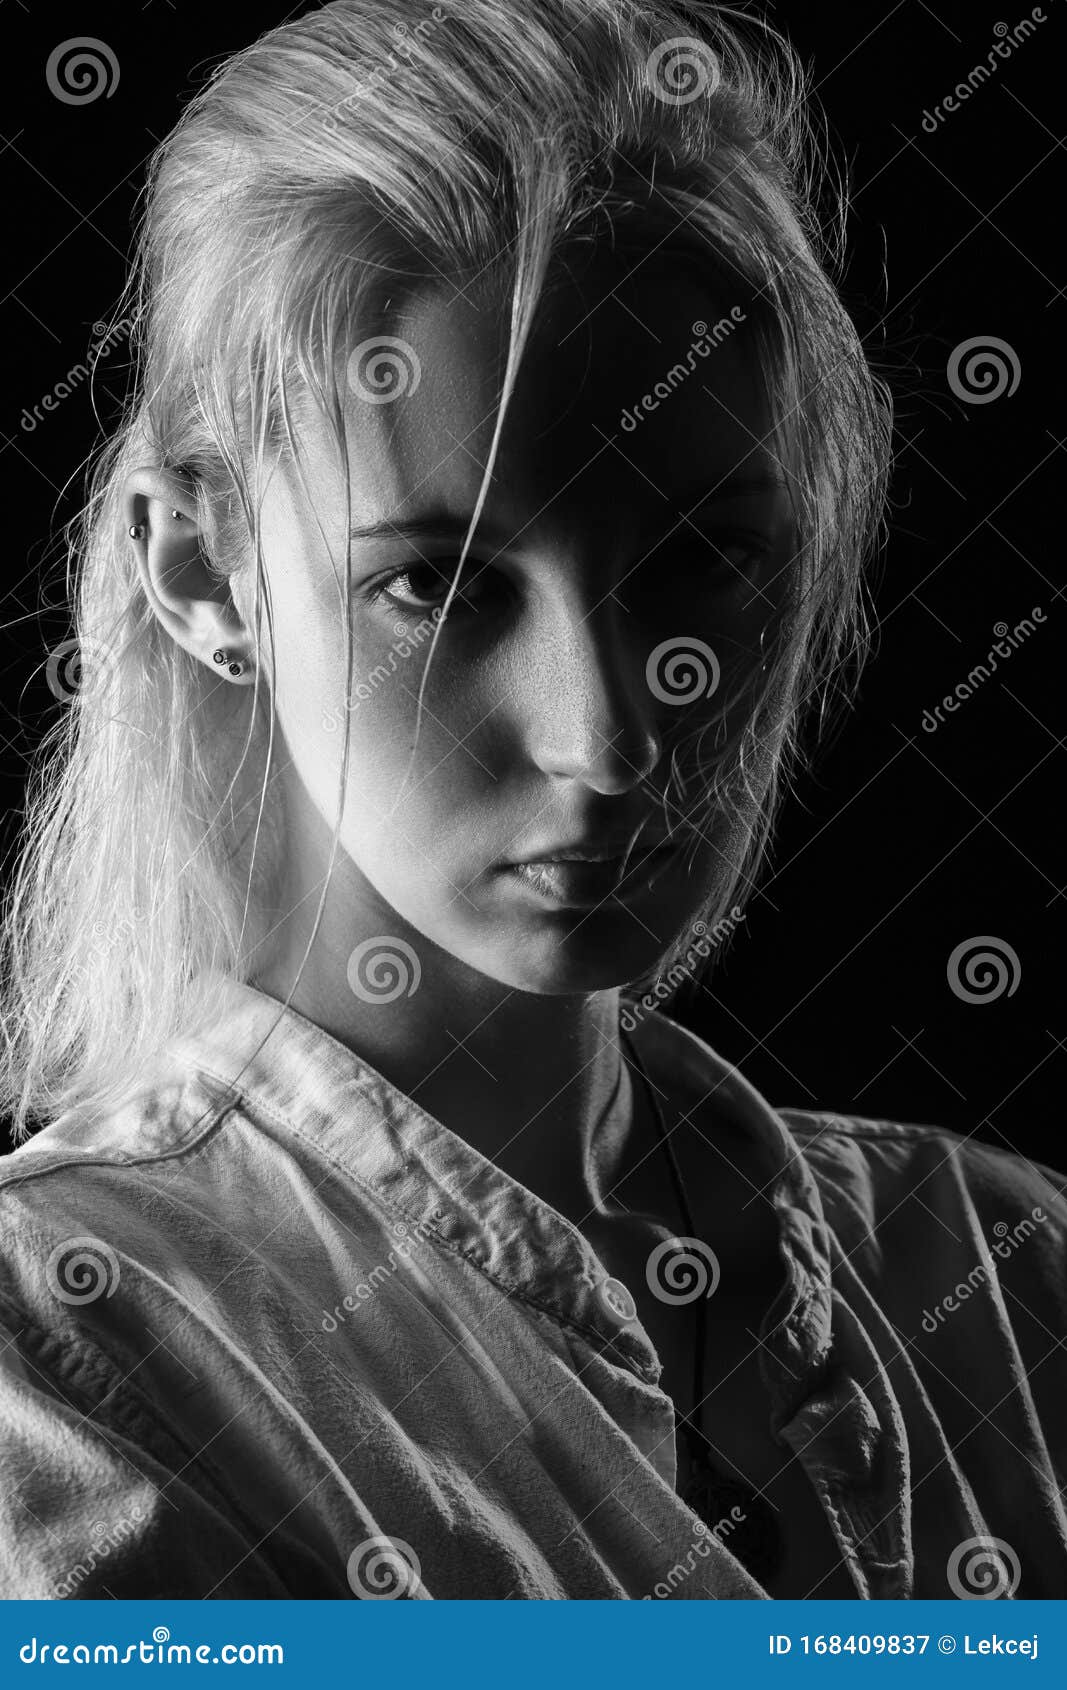 Serious young woman stock image. Image of background - 168409837